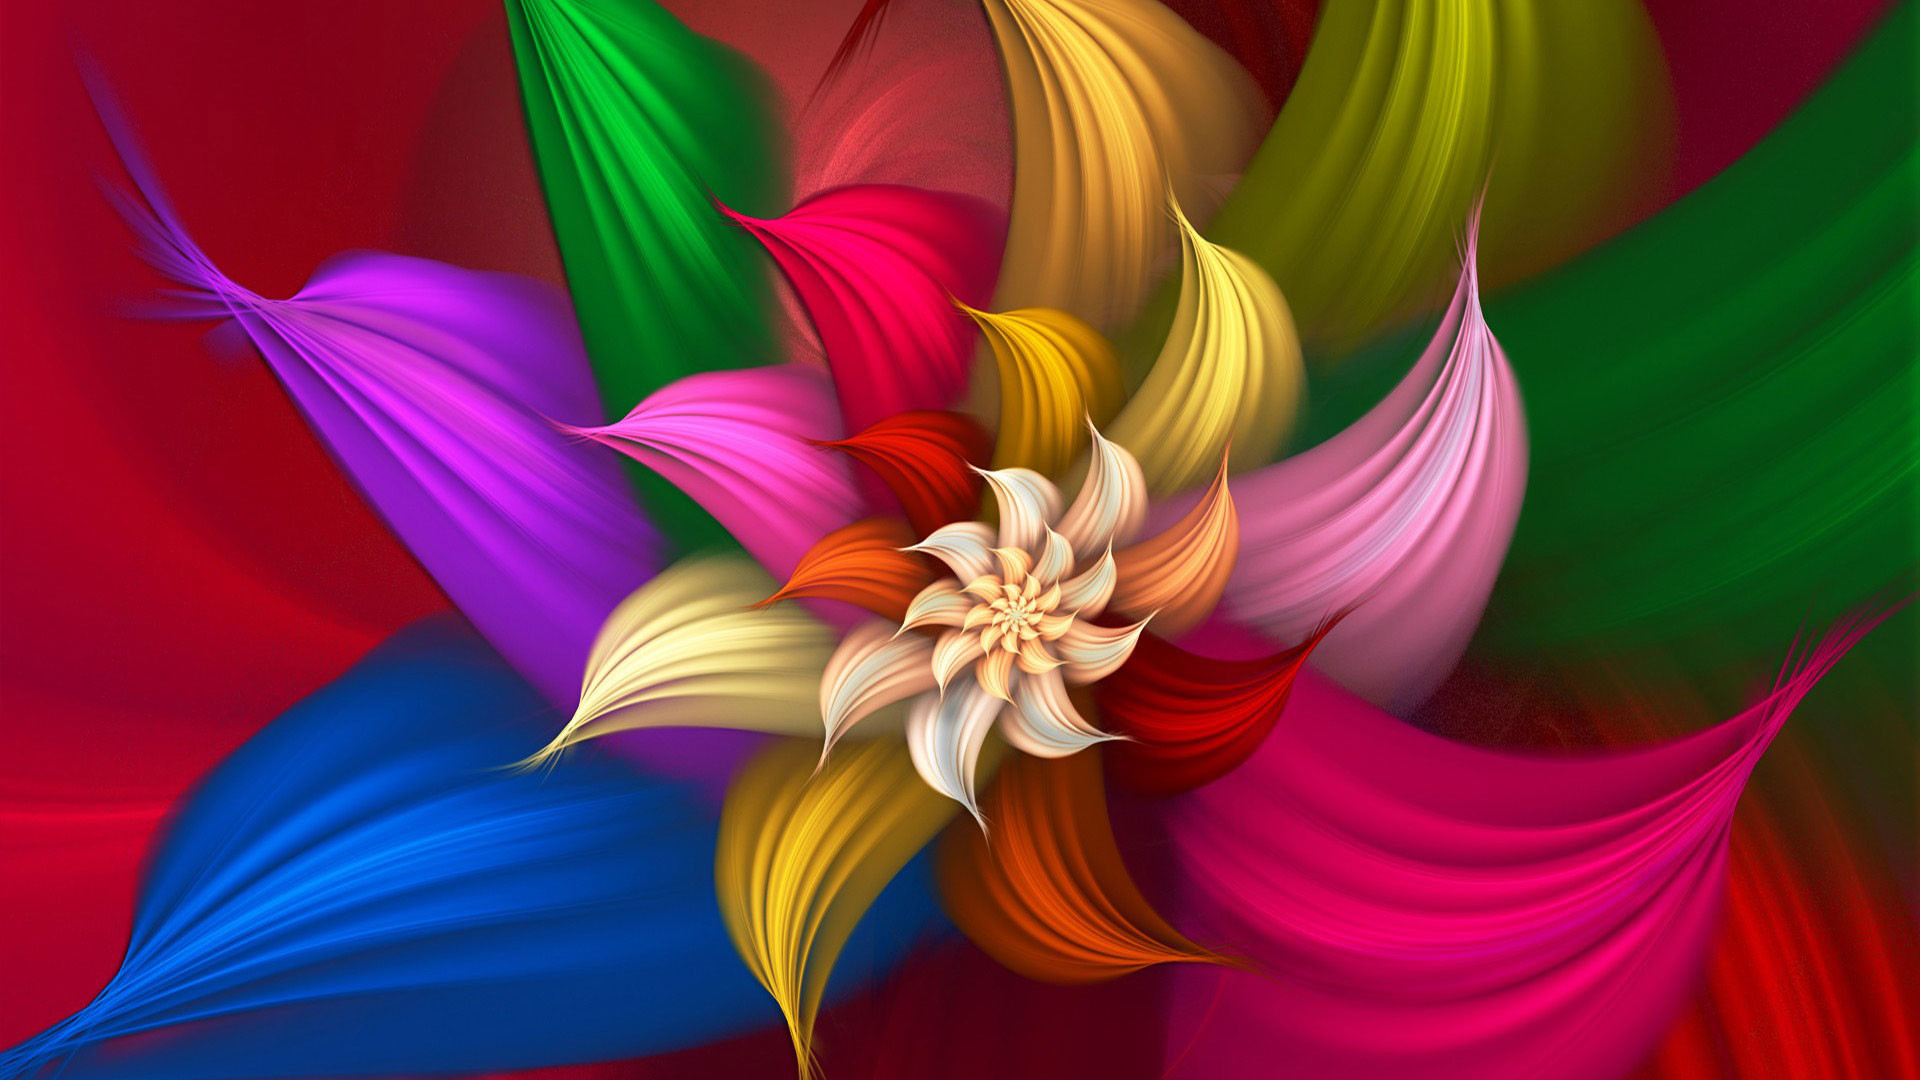 1920x1080 hd-pics-photos-abstract-colorful-flower-wallpaper